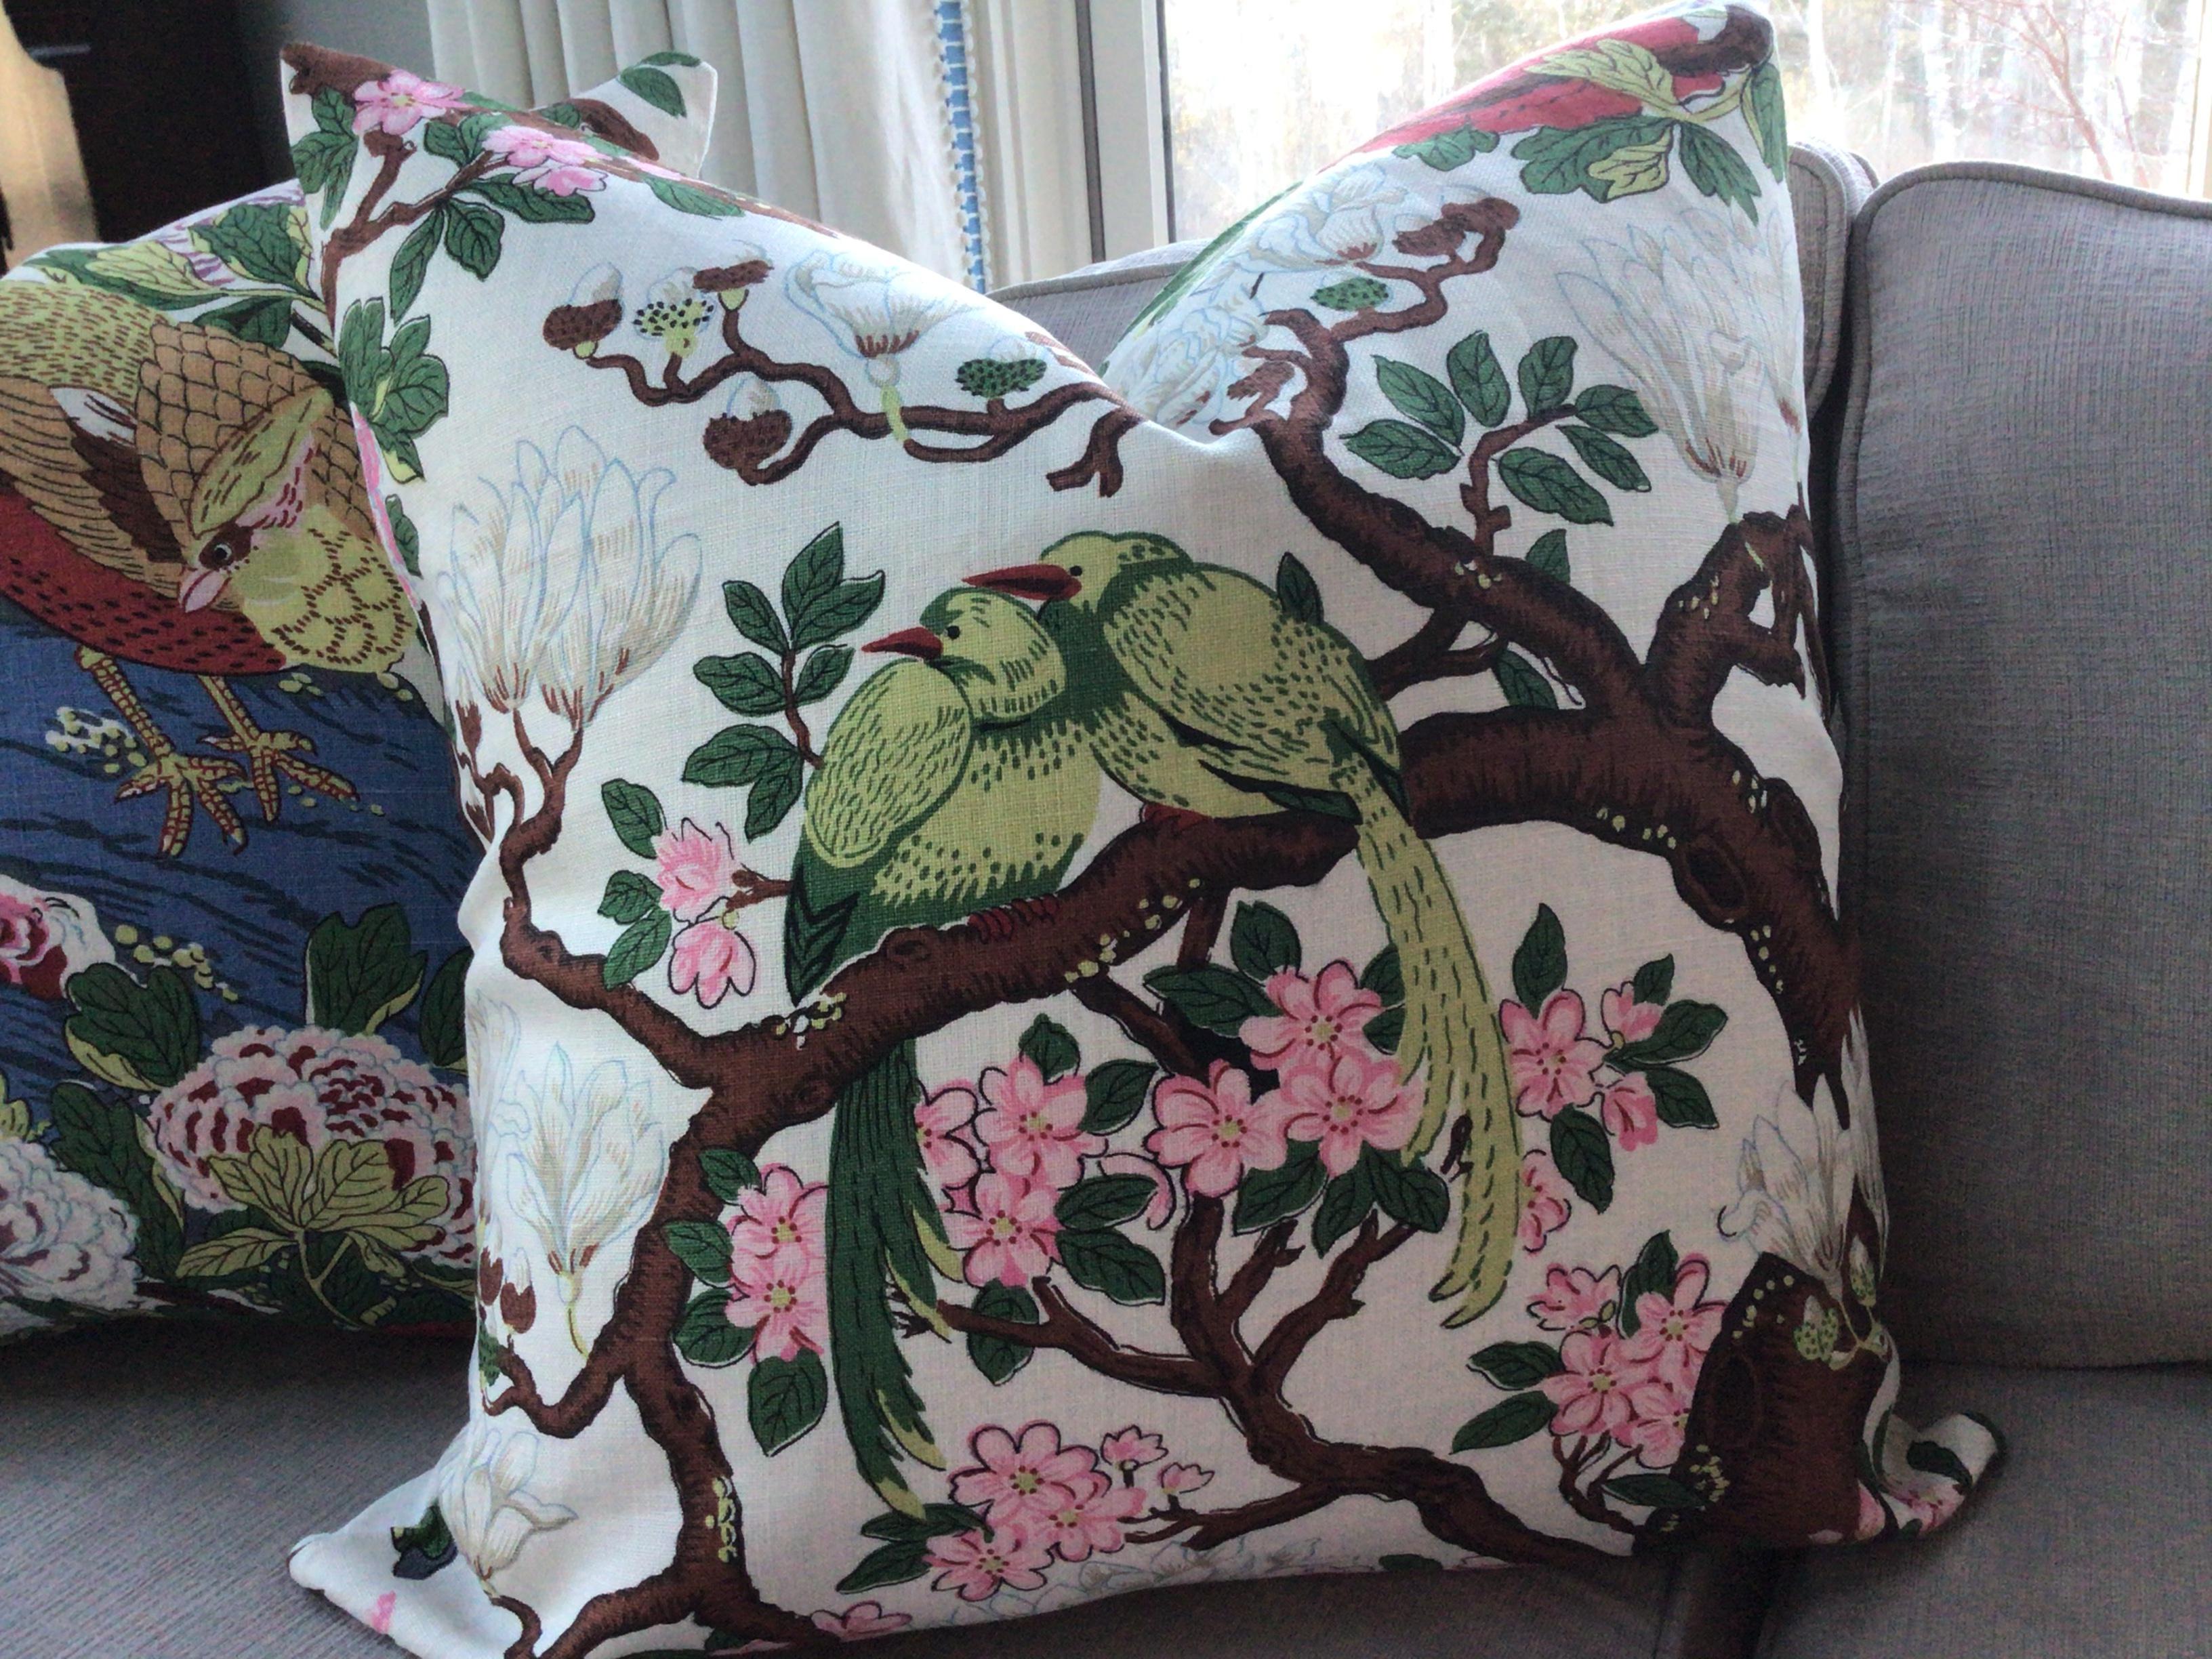 From inimitable design house,GP and J Baker, comes one of their most iconic prints. “Rockbird” is a large scale linen with VIBRANT shades of blue, lime green, red, and pink on an ivory background. Birds and flowers just beautiful.
This listing is